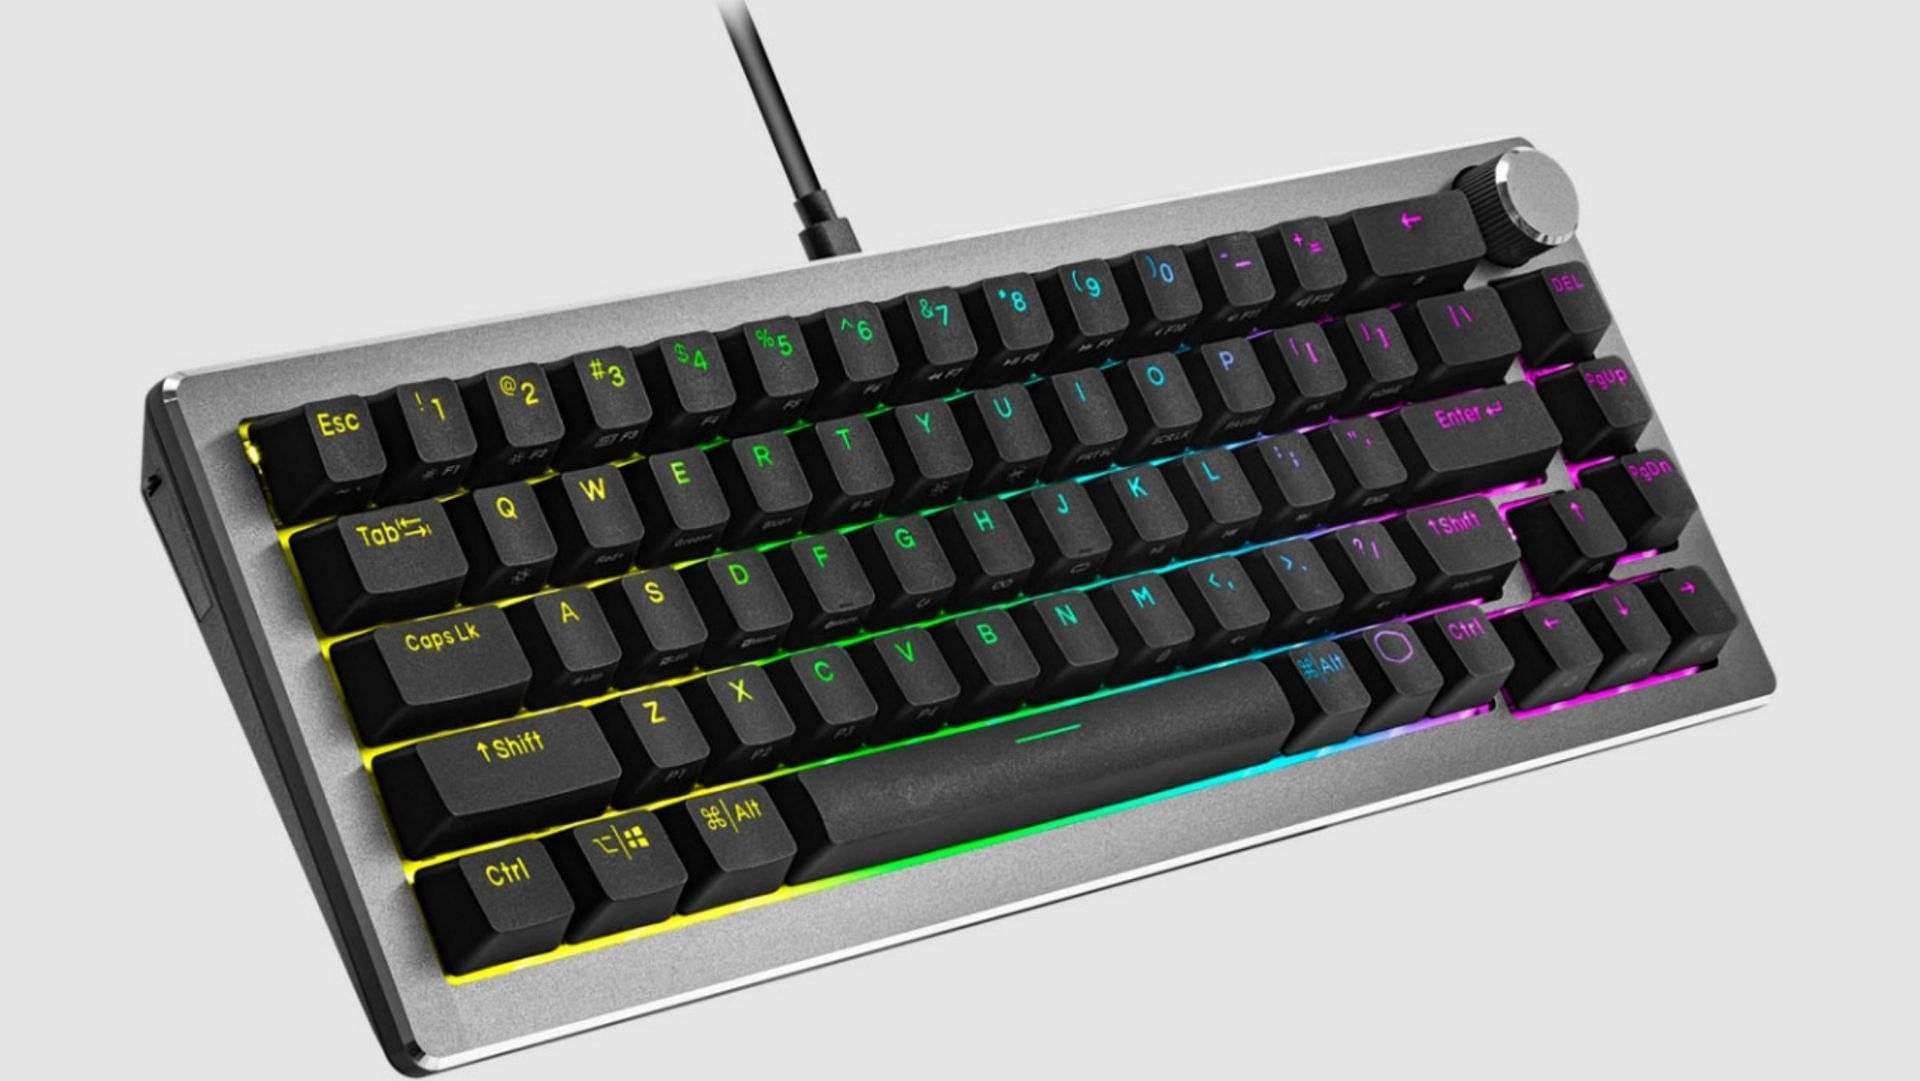 The Cooler Master CK720 is brilliant for fans of customizing their keyboards (Image via Cooler Master)